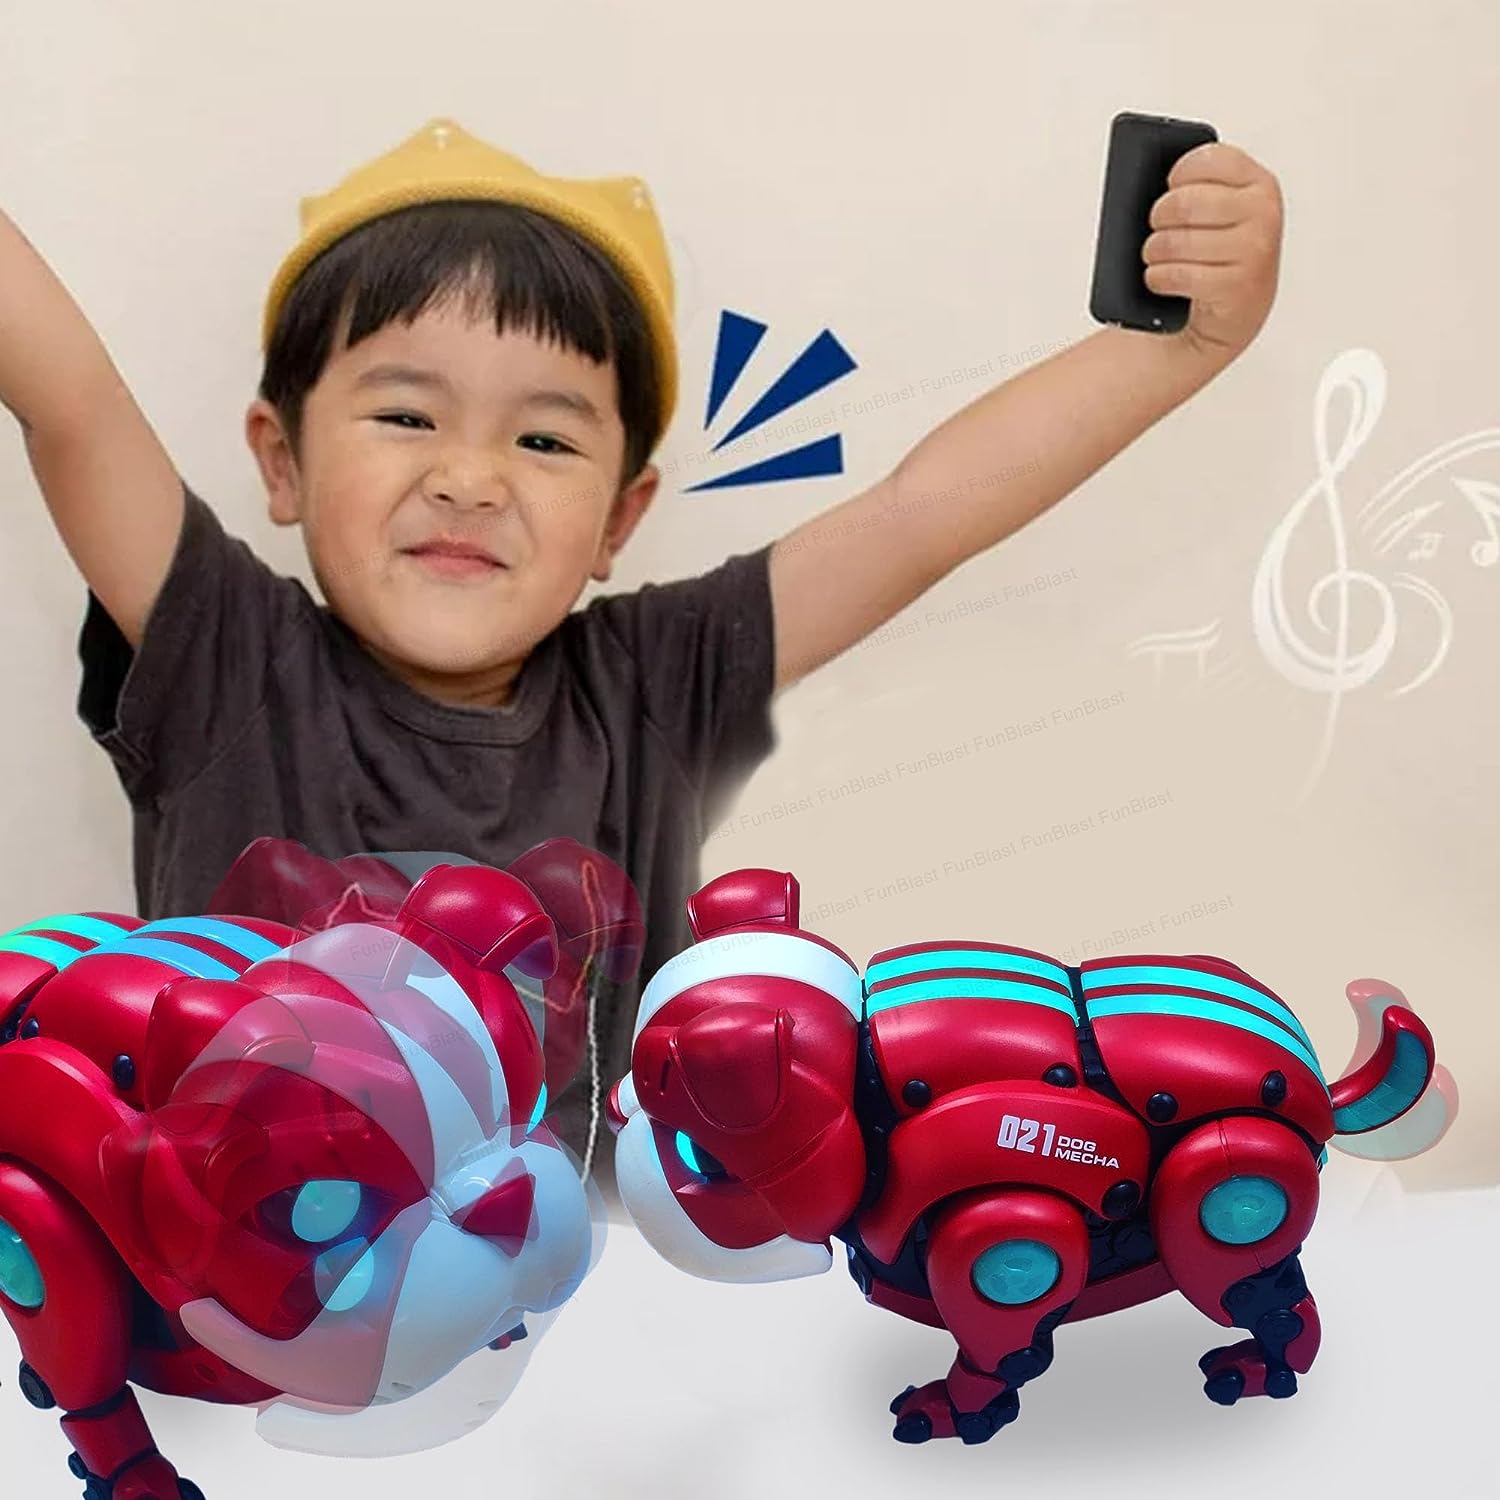 Robot Dog Toy – Musical Dog Robot Toy with Colorful Flashing Lights and Music for Kids Boys Girls, Robot Dog Toy Action Figure, Robot Toys for 3+ Years Old Kids